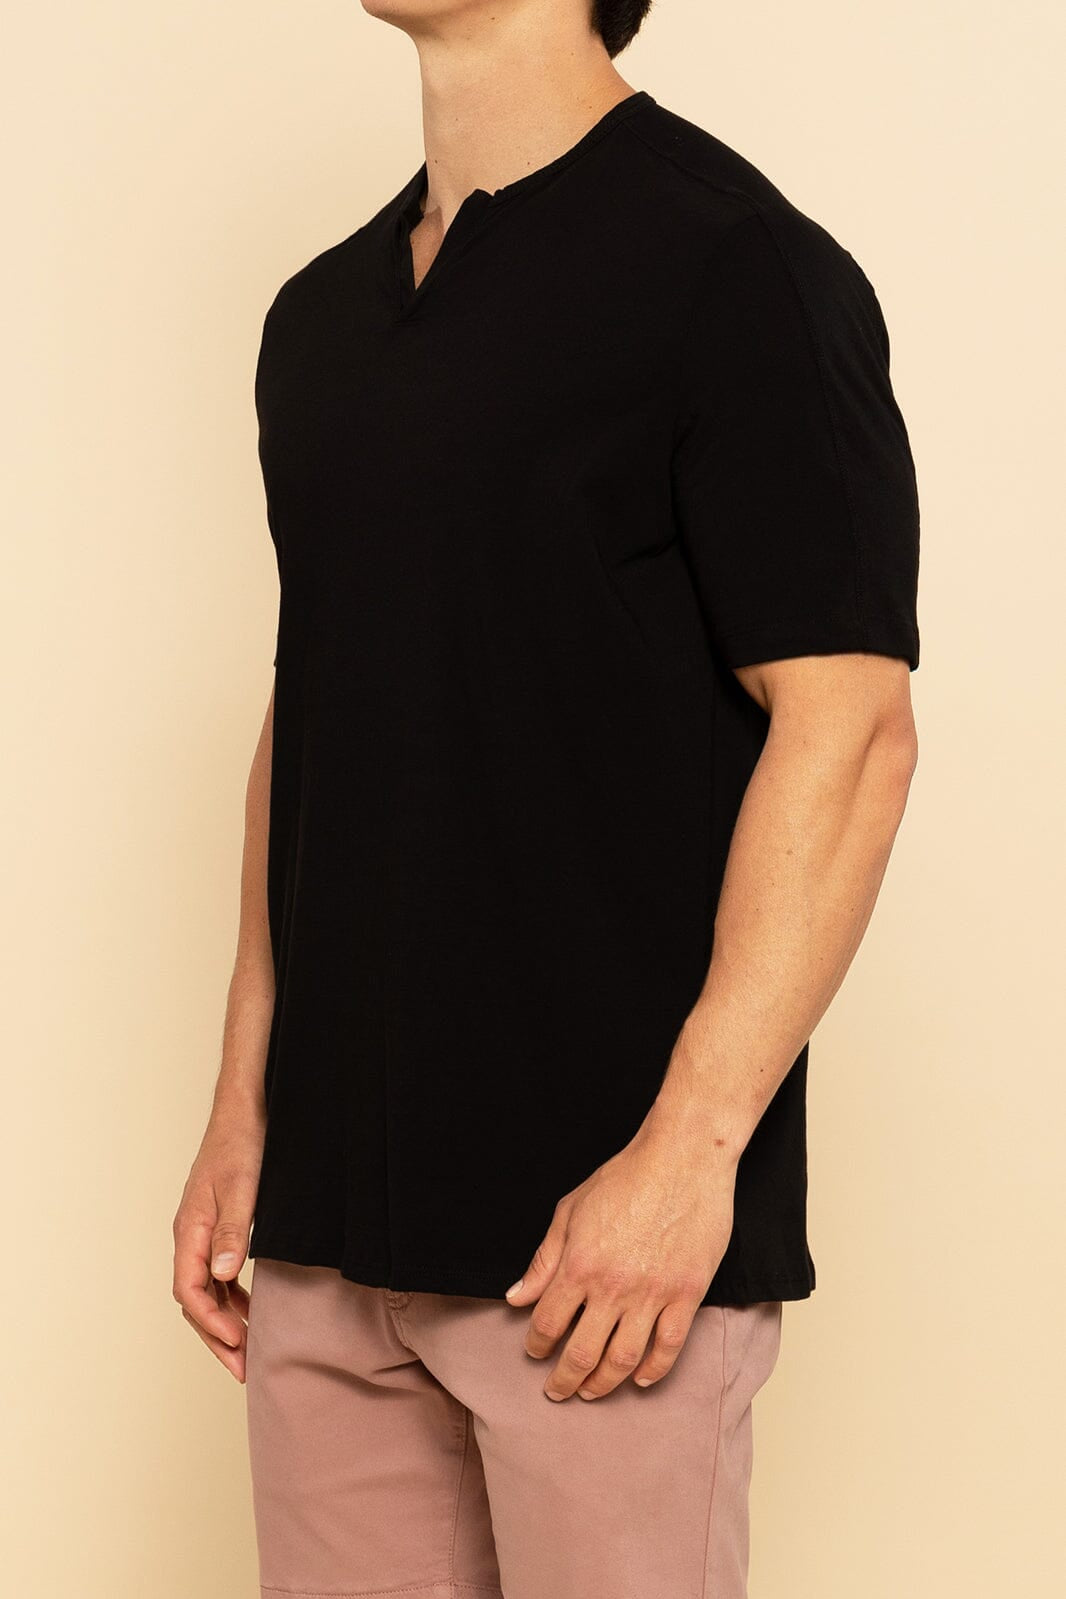 Black Notch Neck Tee For Men - Front Side Angle